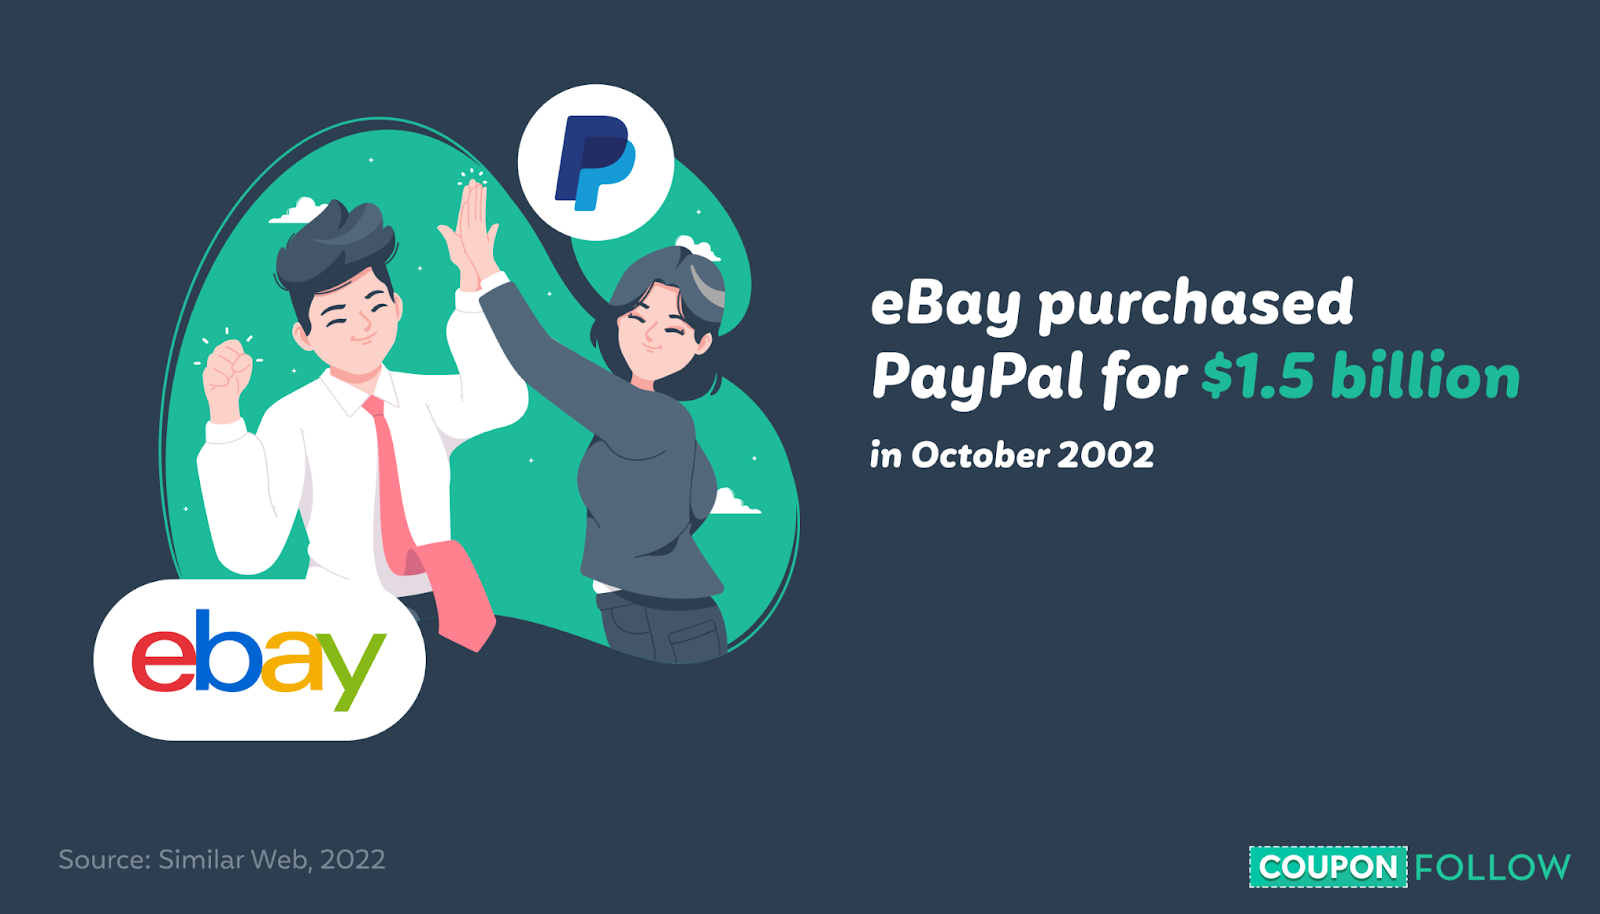 Illustration showing that paypal was purchased by ebay